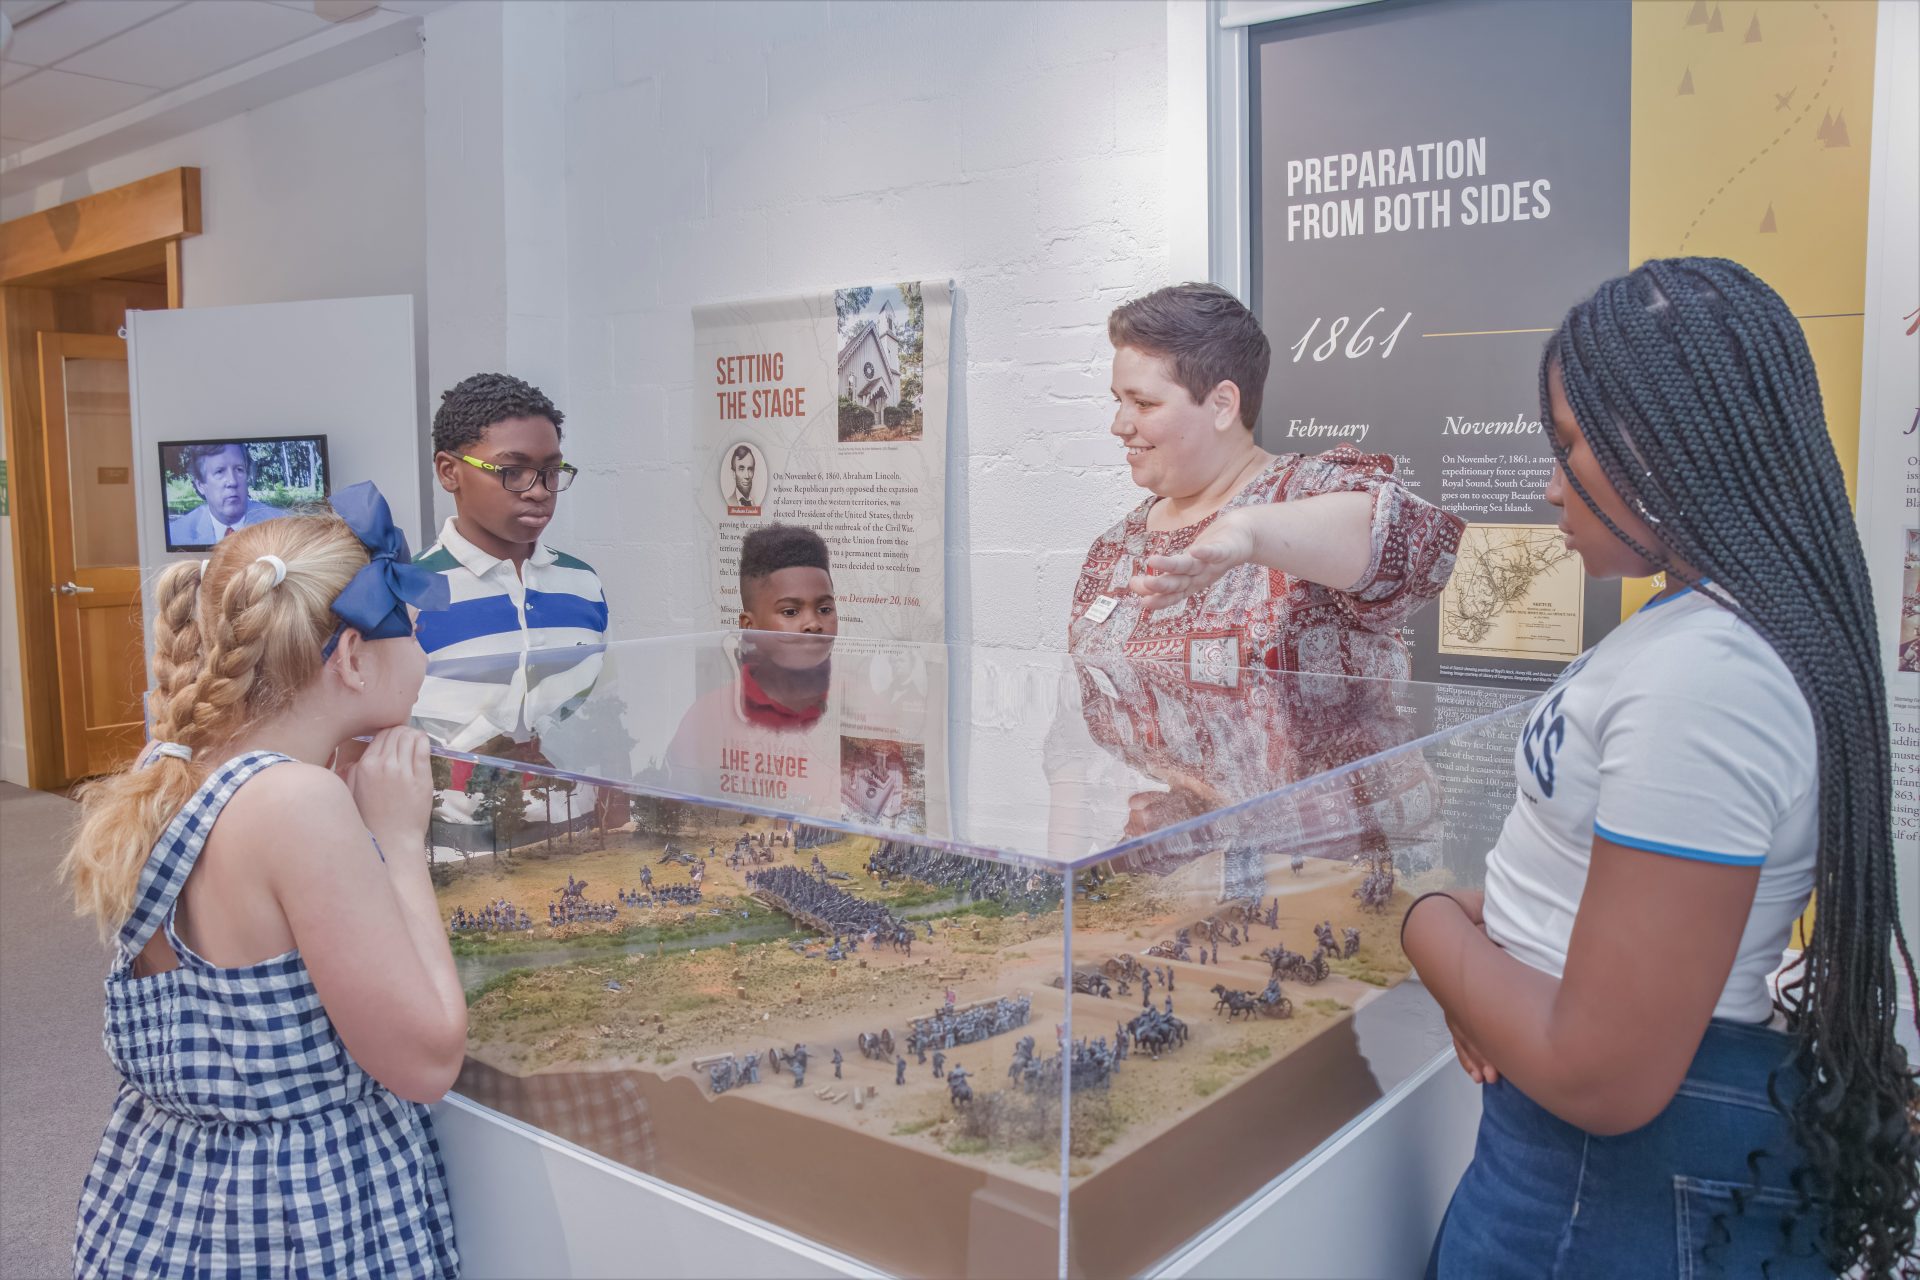 Morris Center for Lowcountry Heritage is a learning and exhibition center dedicated to preserving and cultivating the history, culture and the spirit of Ridgeland and its surrounding counties. Submitted photo